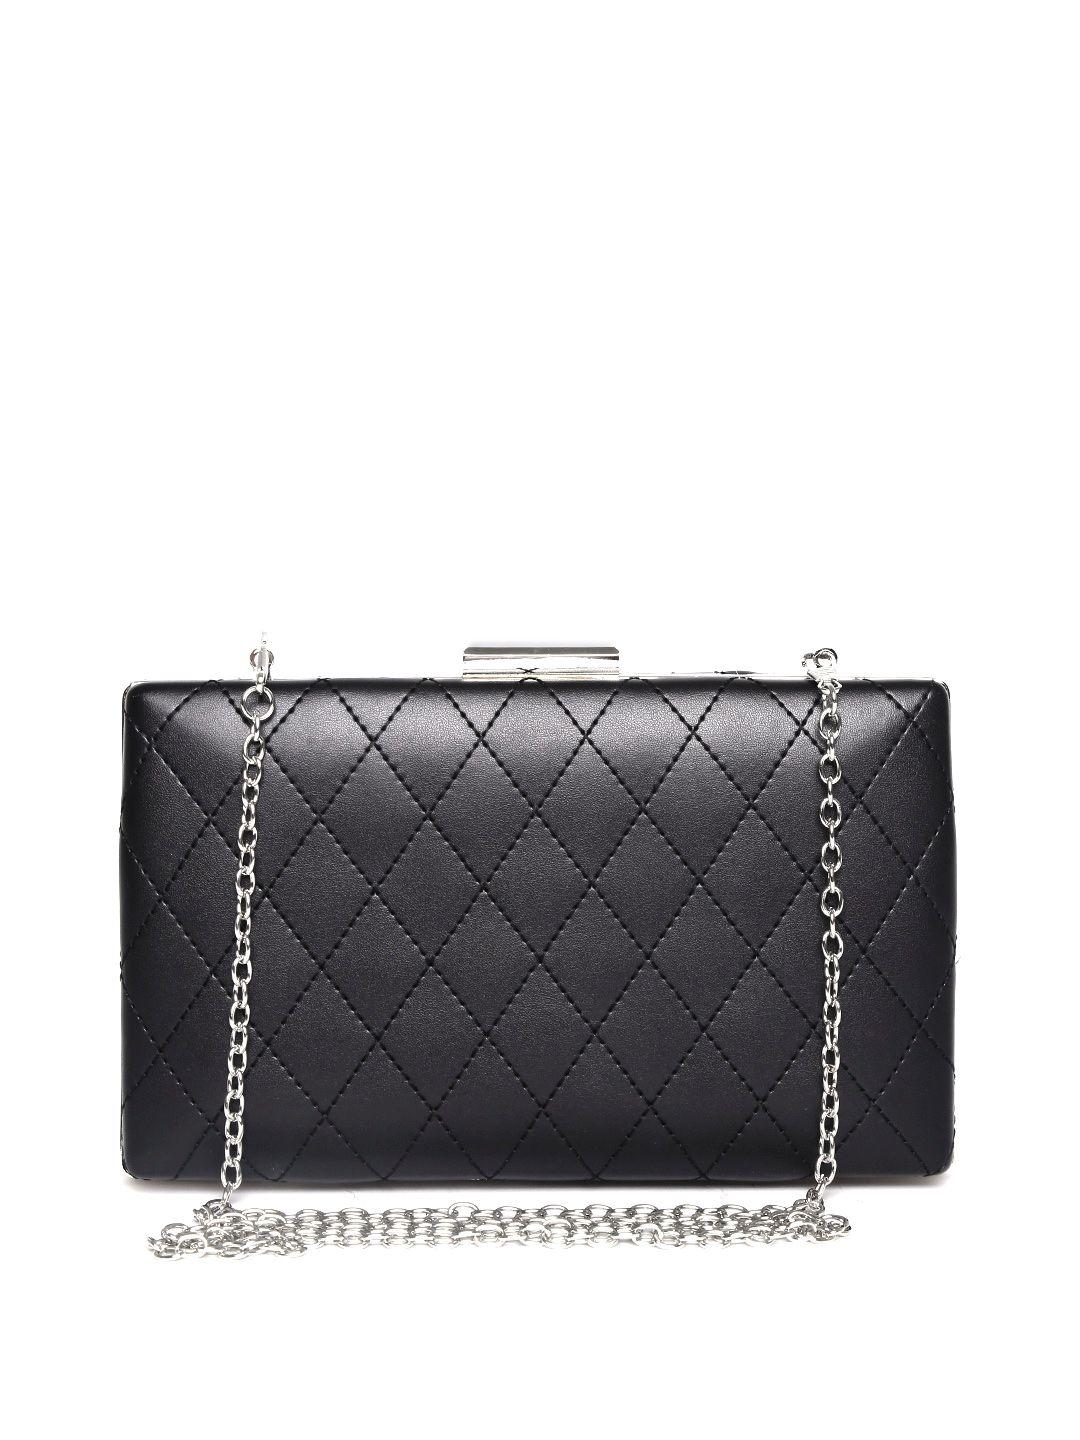 lino perros black quilted box clutch with chain strap